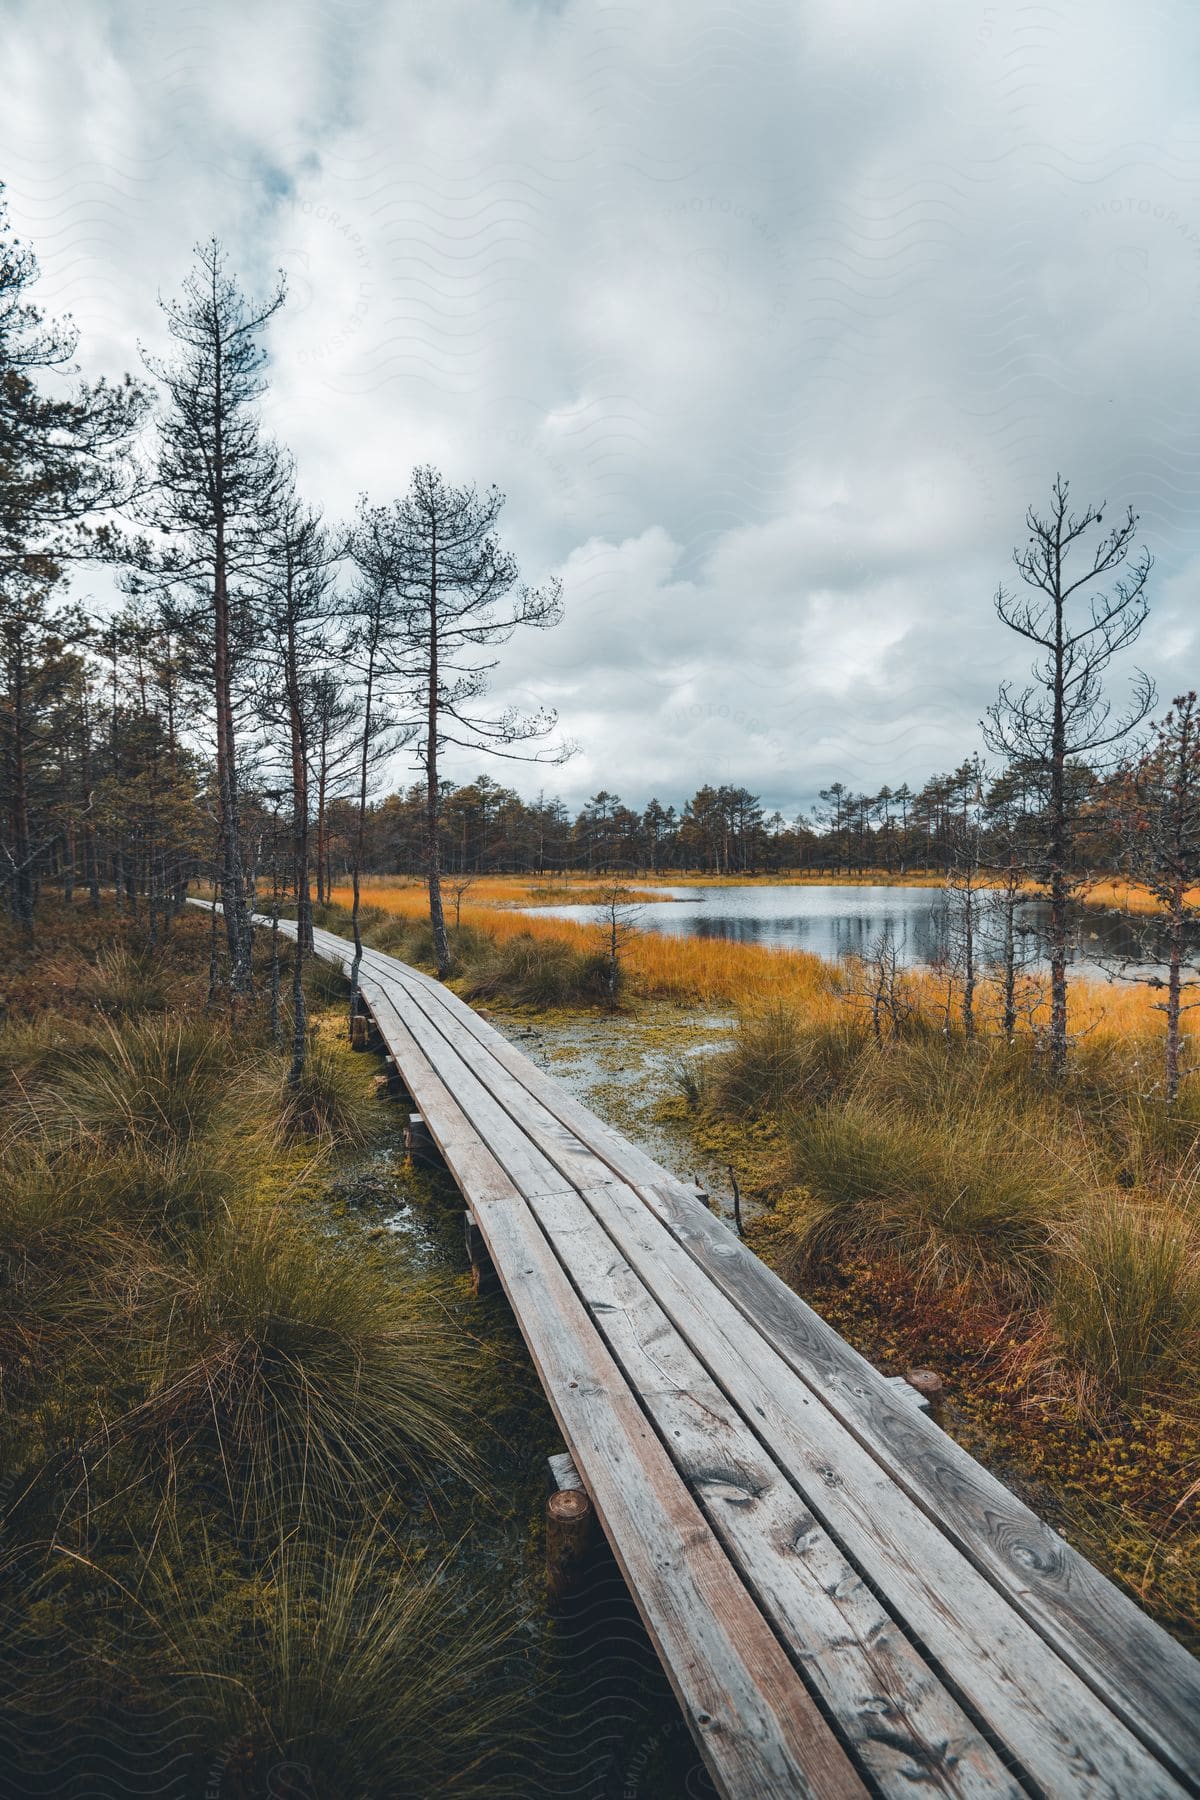 A wooden walking path crosses through a marsh past a lake in a forest on a cloudy day